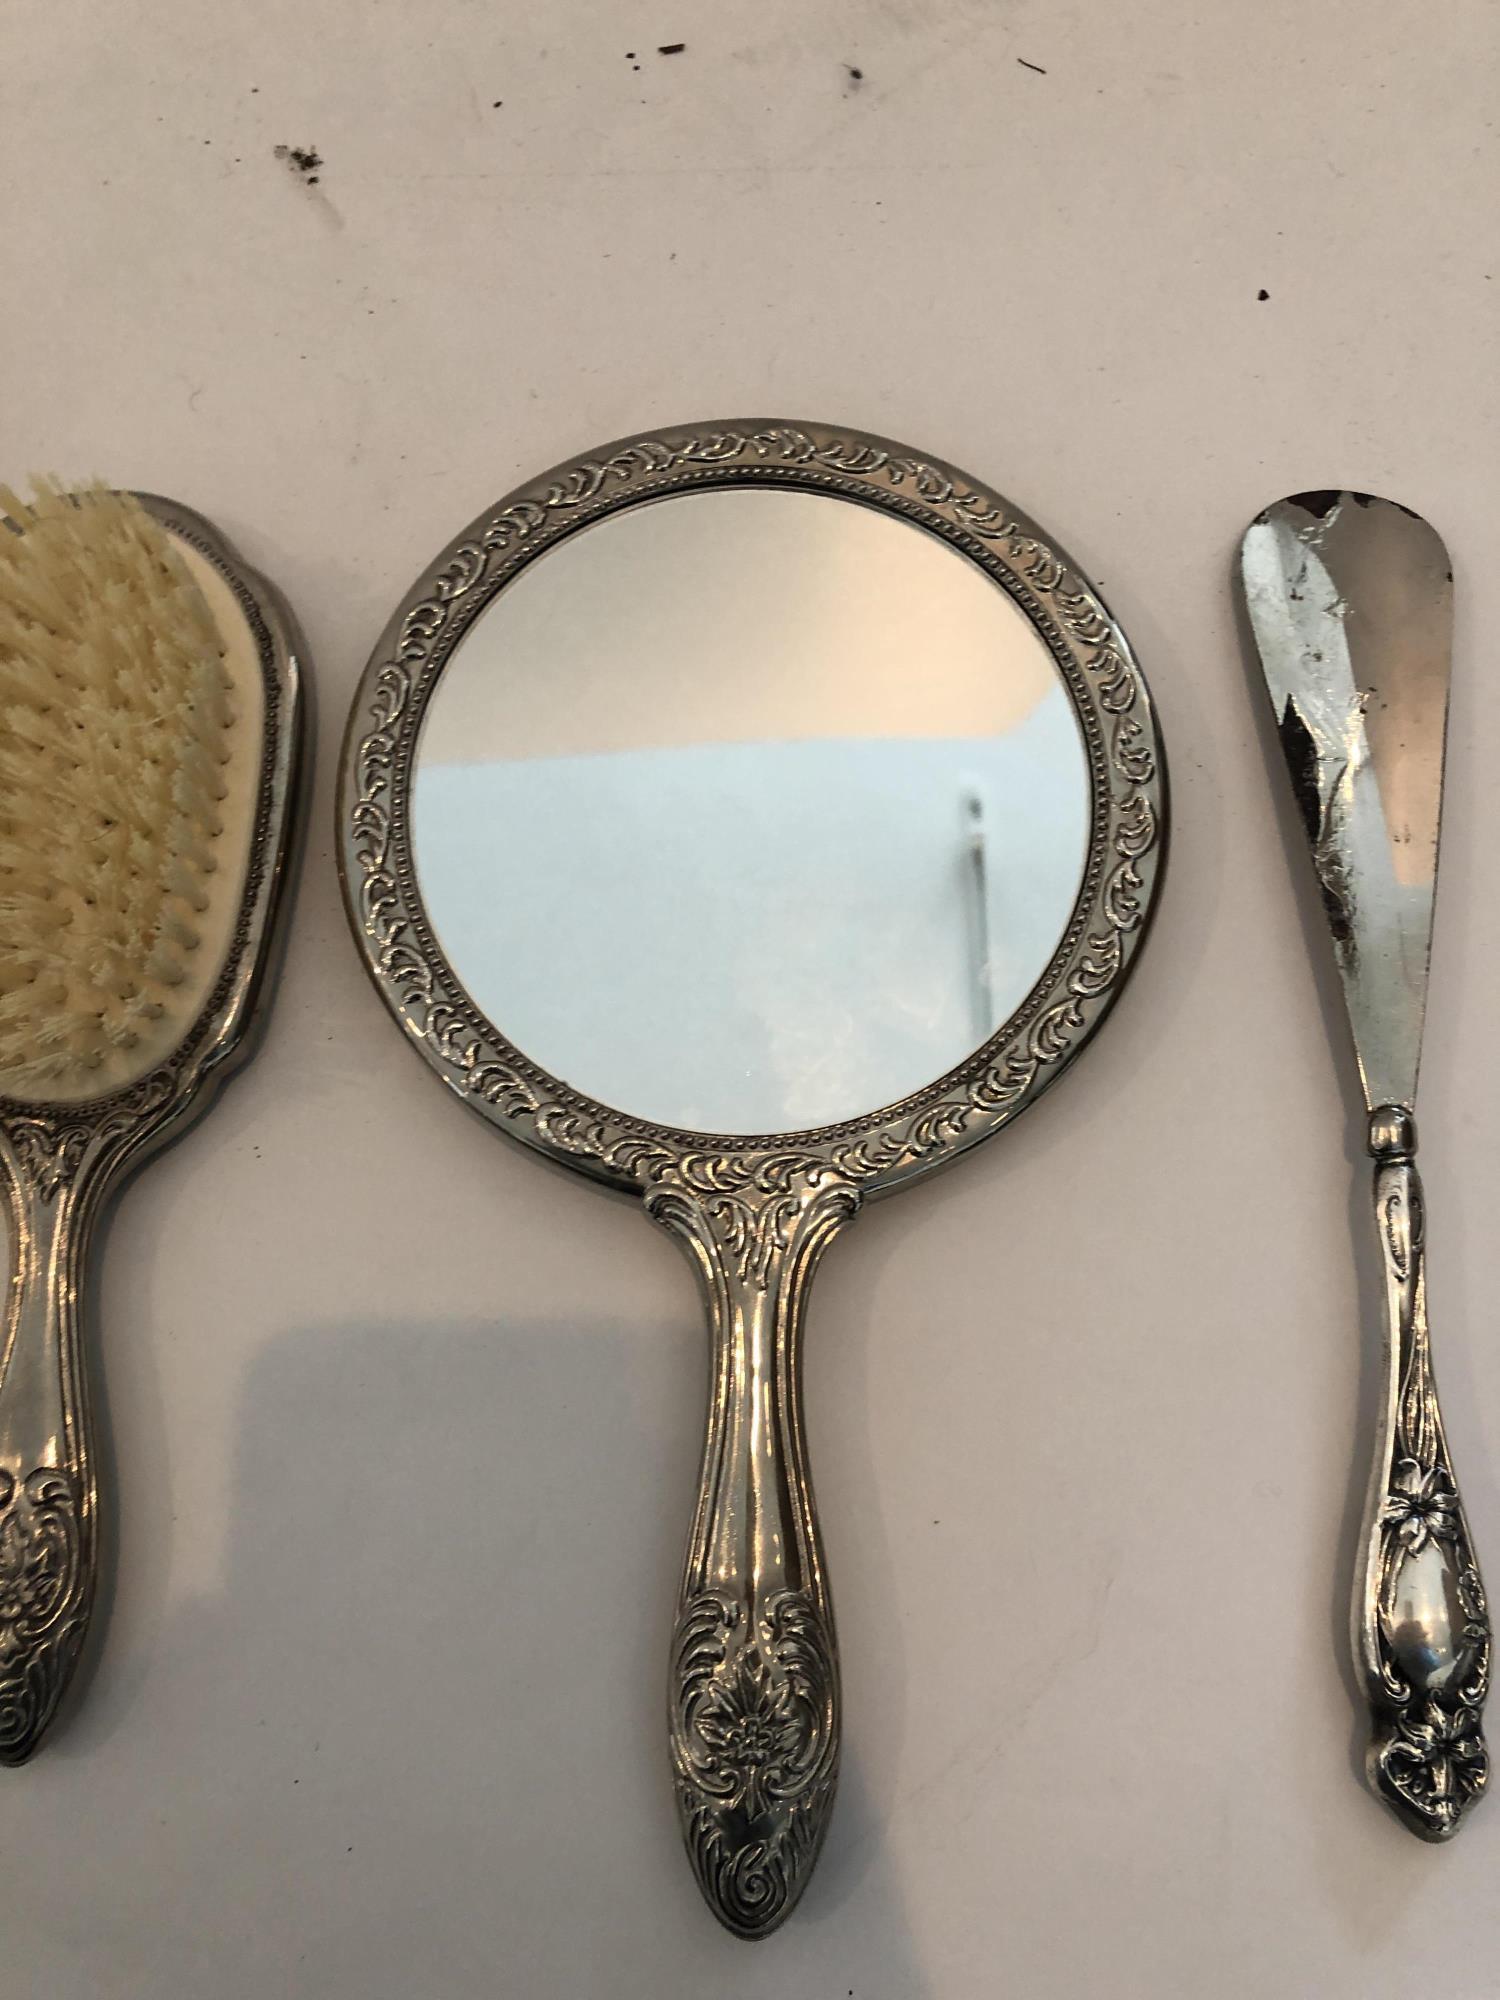 4 STERLING & PLATE - 2 BRUSHES, SHOE HORN, MIRROR